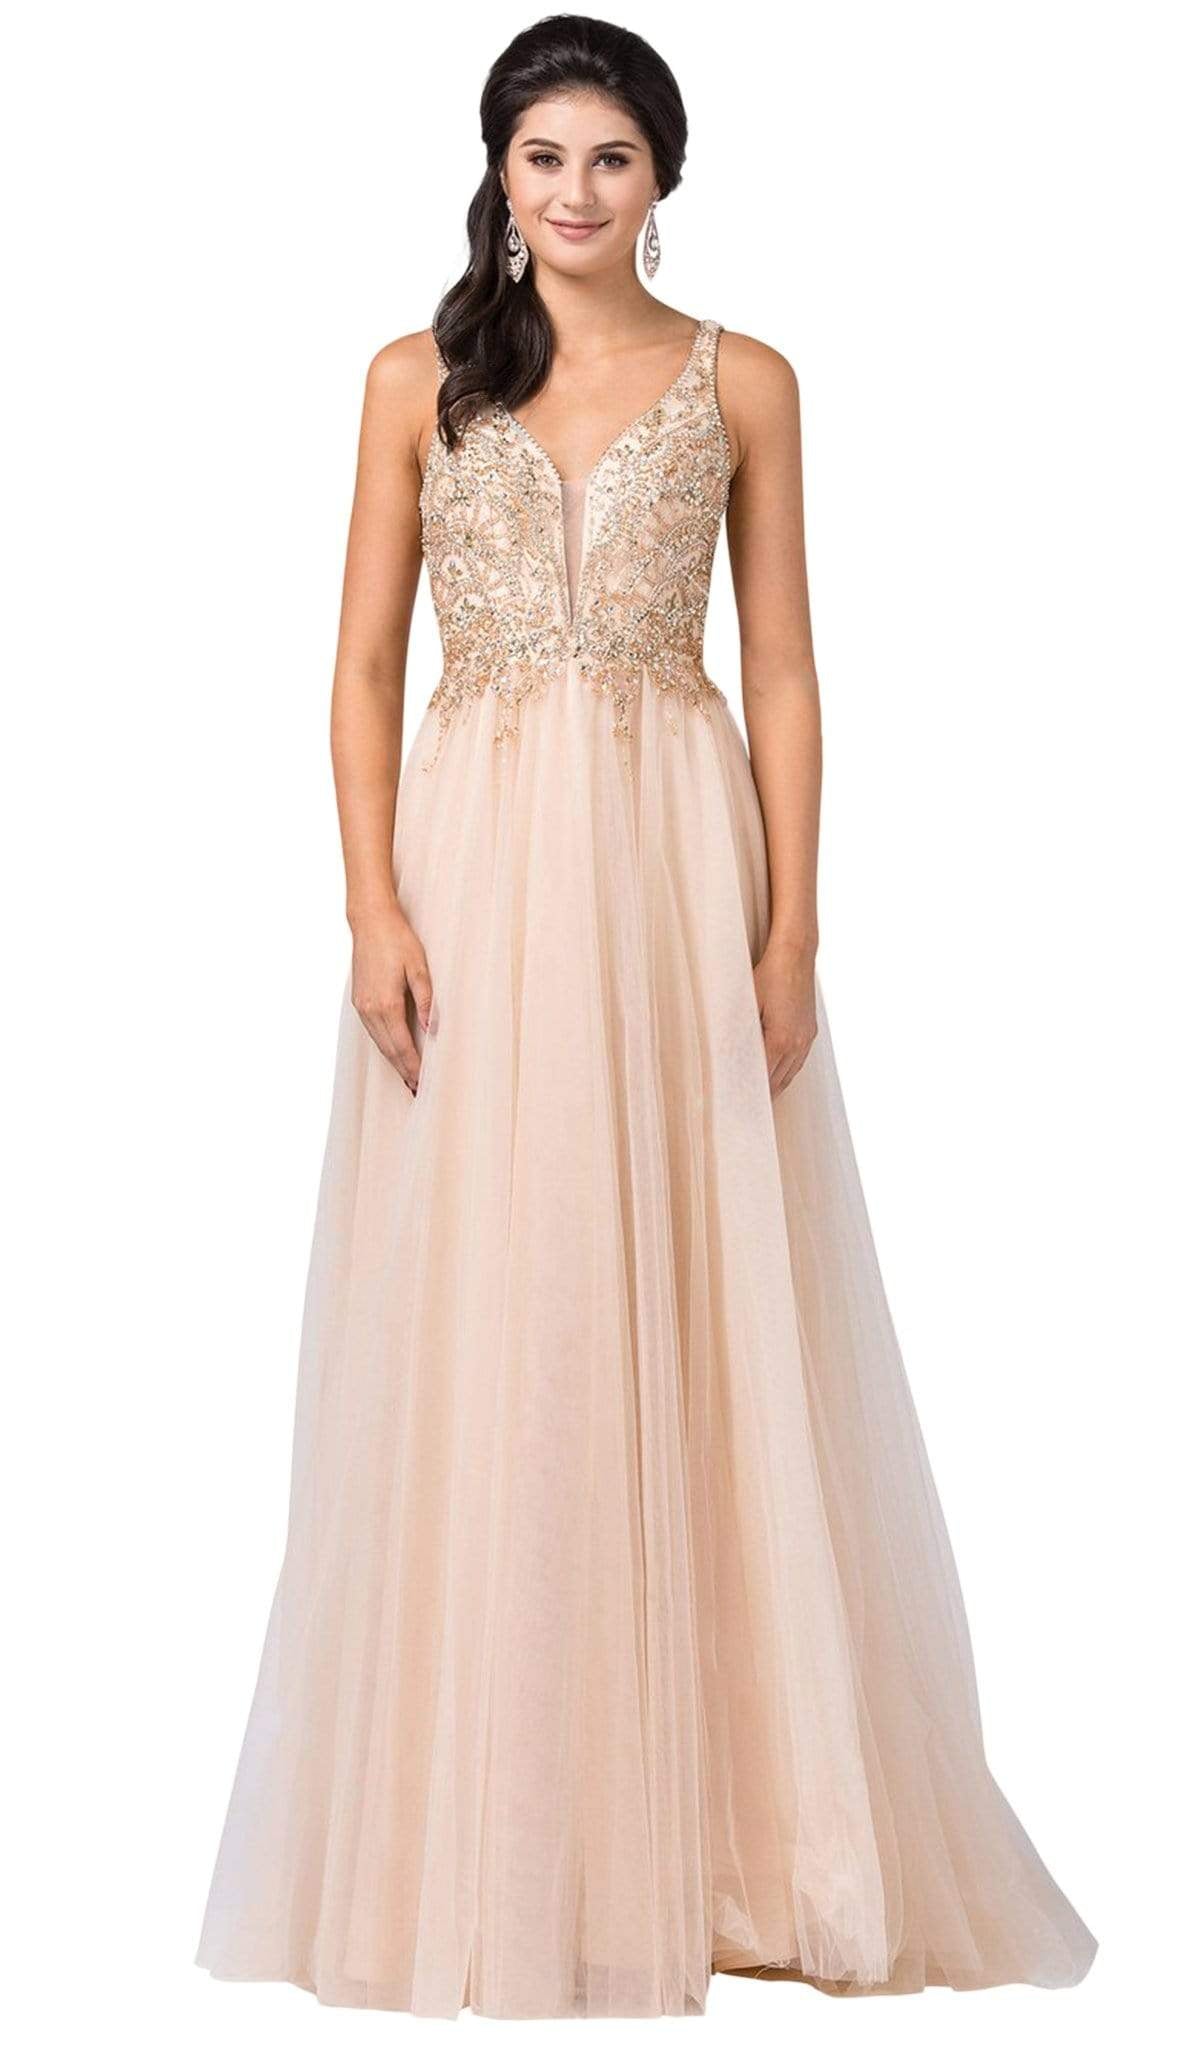 Dancing Queen - 2514 Plunging V-Neck Bejeweled Bodice A-Lin Gown
